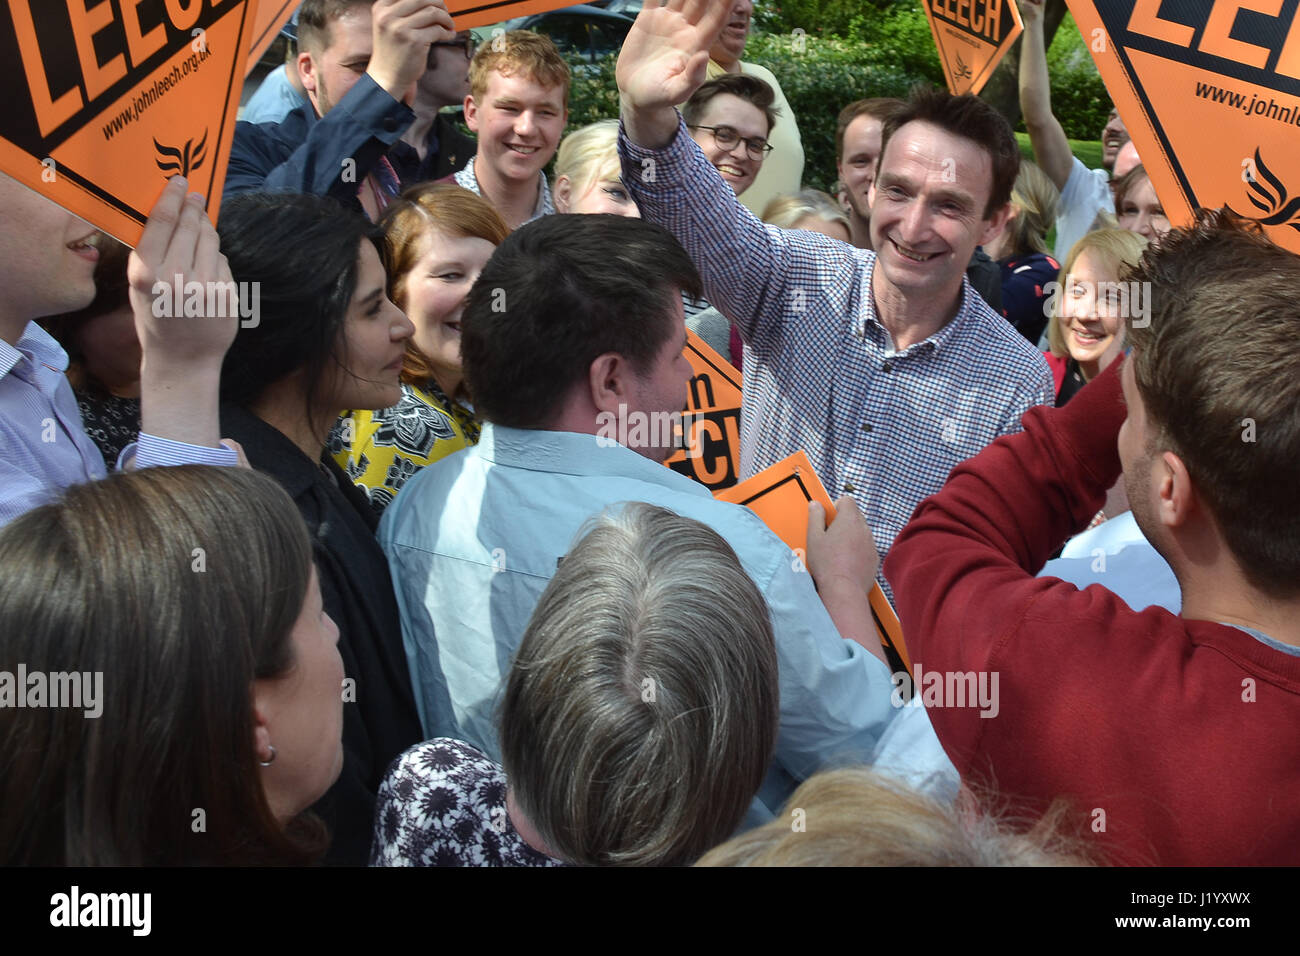 Didsbury, UK. 22nd April, 2017. John Leech is greeted and surrounded by crowds of supporters as he arrives in Didsbury to deliver his first campaign rally speech of the 2017 General Election. Leech was the Liberal Democrat MP for Manchester Withington from 2005 until 2015 when he lost to Labour. Leech was elected to Manchester Council in 2016 as the sole opposition, sweeping up 53% of the vote. He is hoping to regain the Withington Parliamentary seat in the 2017 general election. He promised to fight against a hard Brexit, saying Labour and Conservatives had let Manchester down over Brexit. Stock Photo